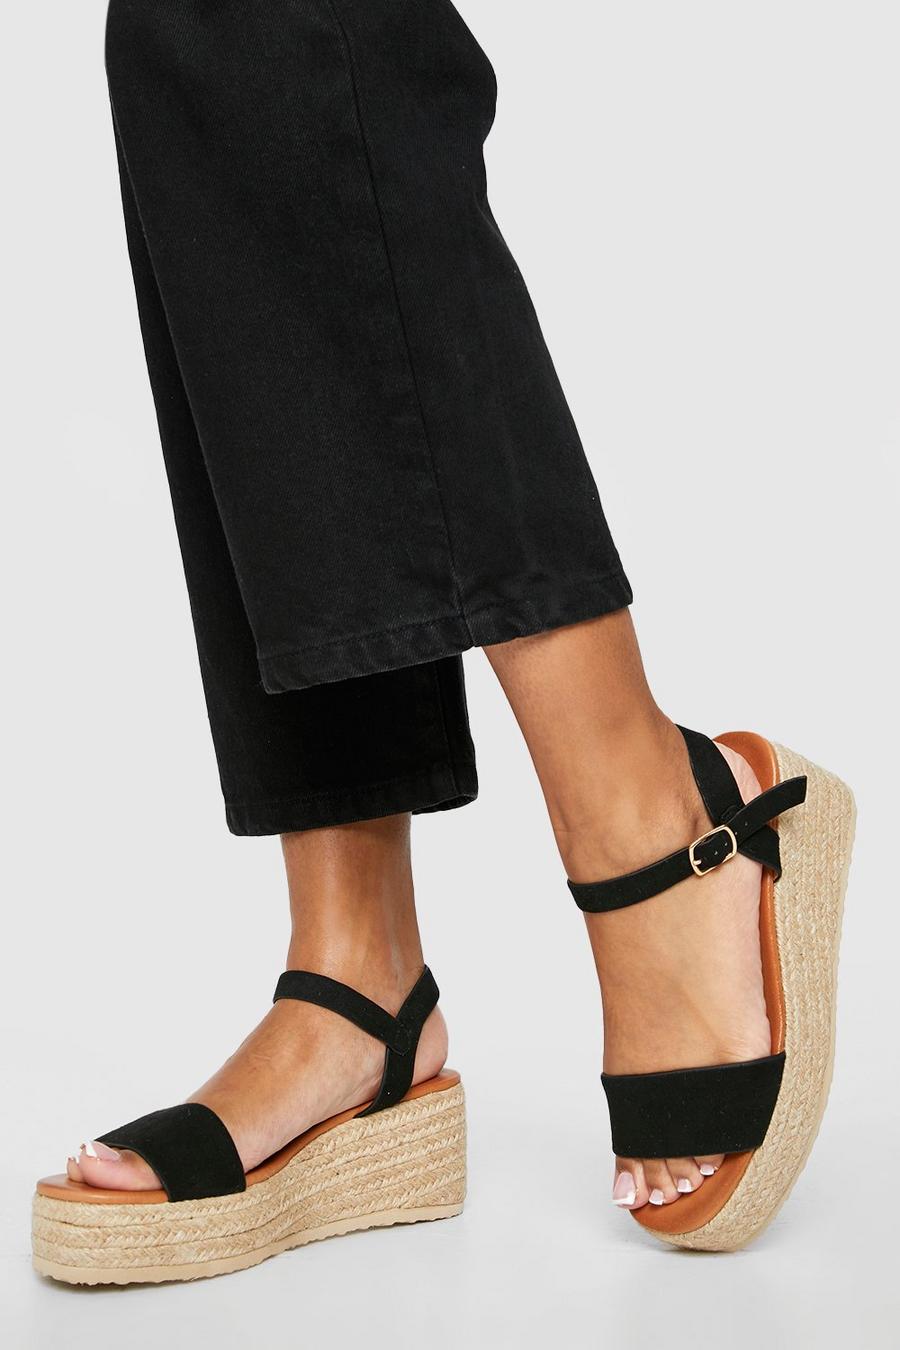 Black 2 Part Mid Height Wedge